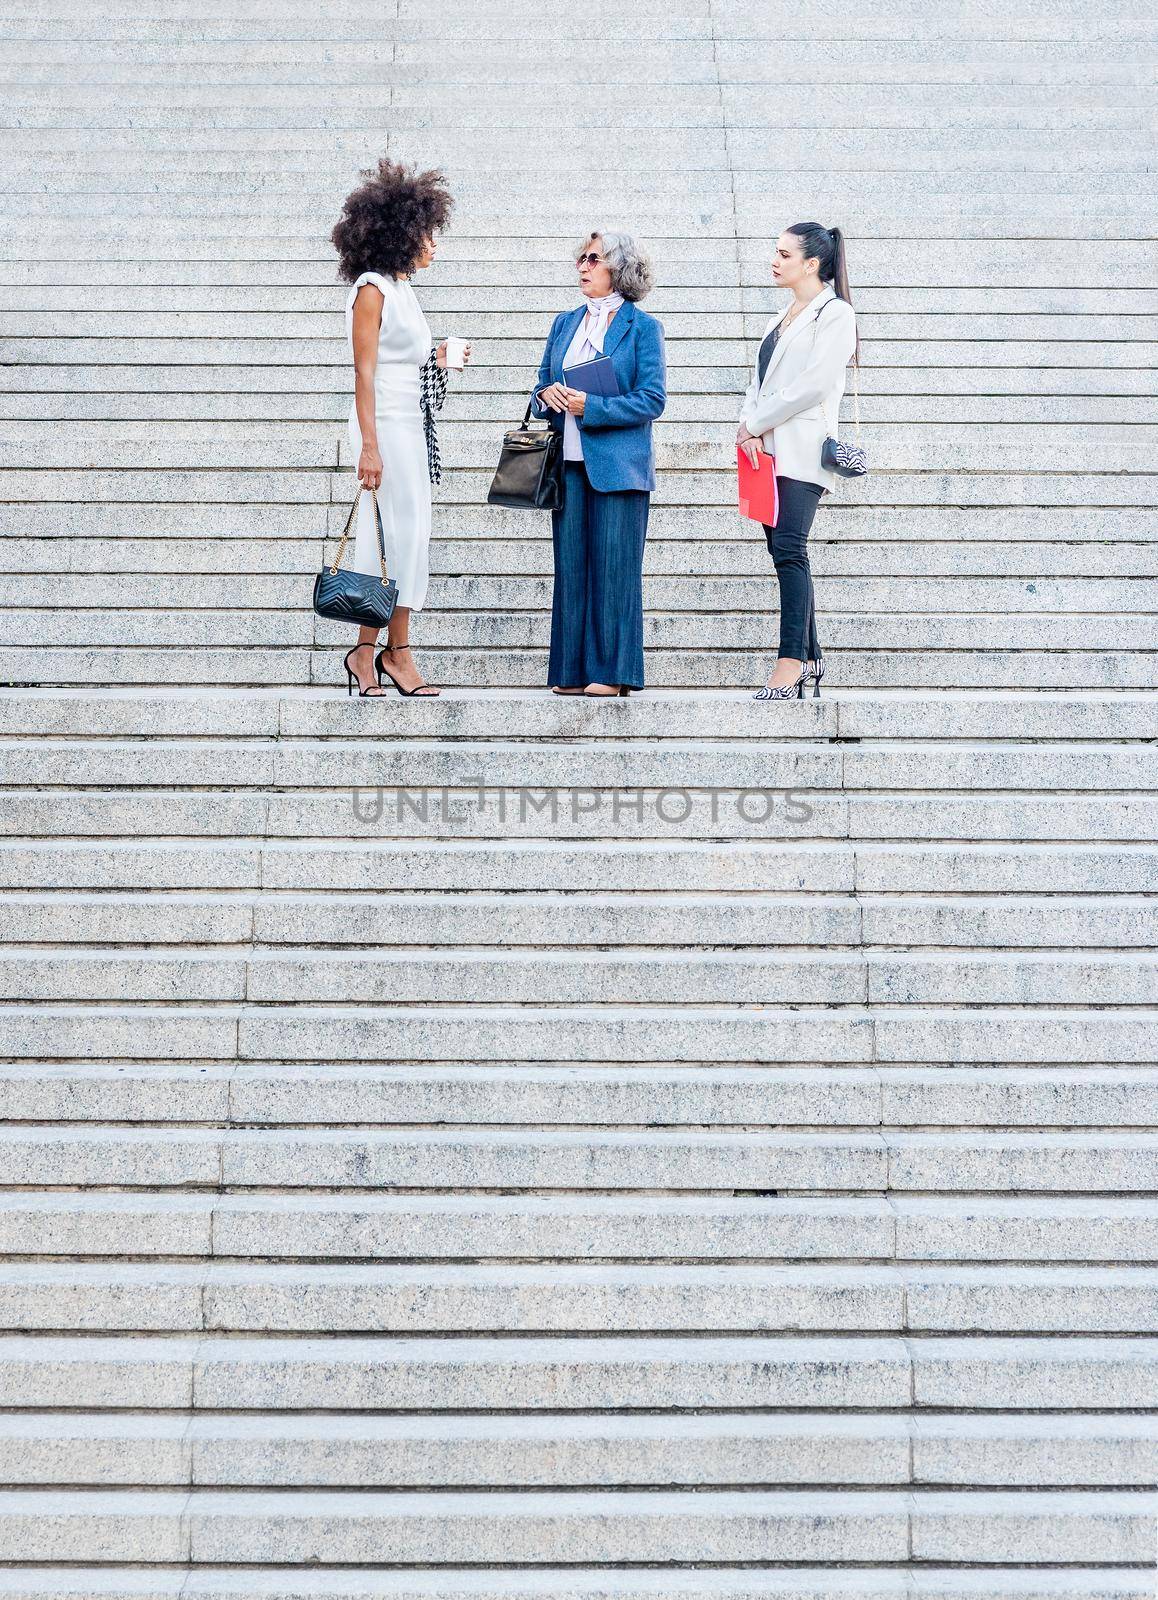 co-workers talking in the middle of a granite staircase by ivanmoreno